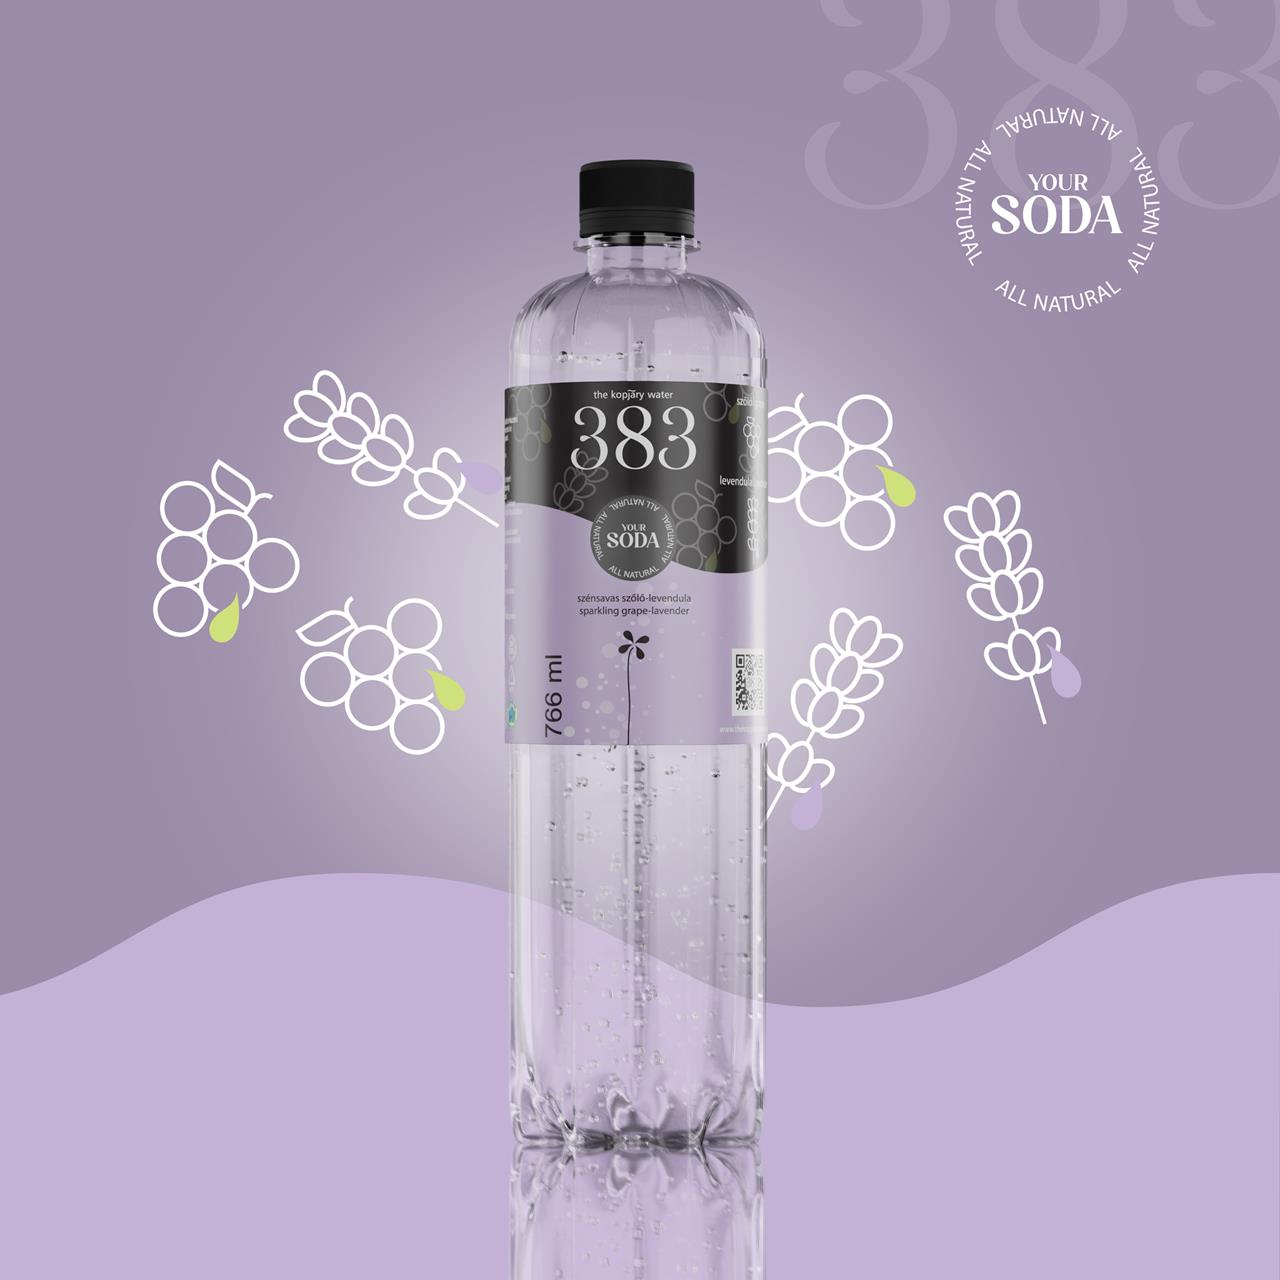 383 THE KOPJARY WATER grape-lavender flavored, carbonated, 766 ml